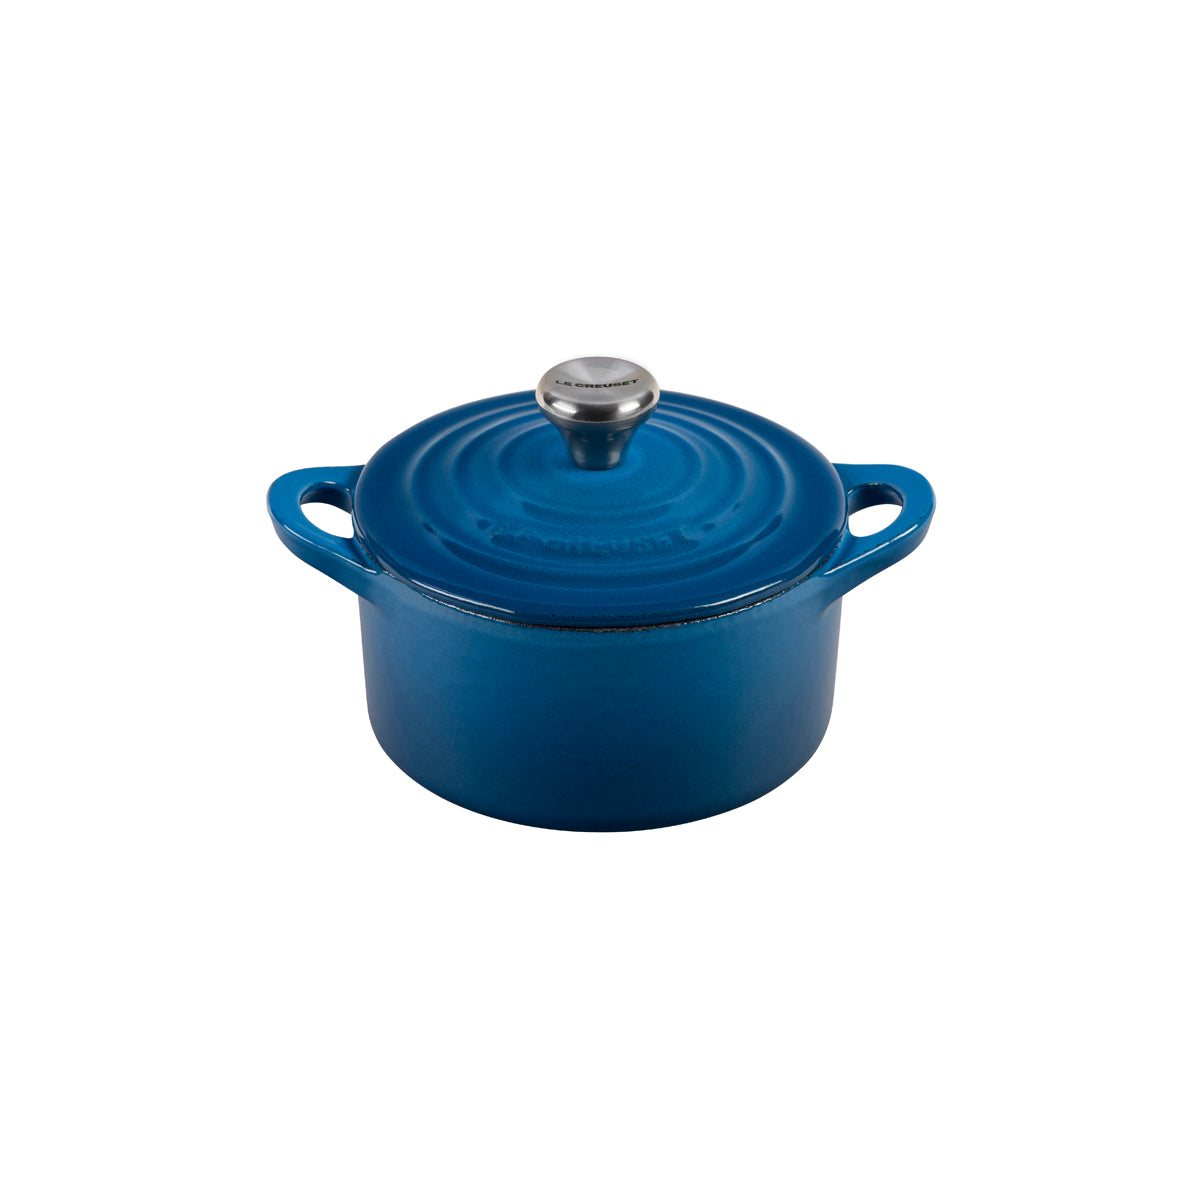 Le Creuset - Sunday blues aren't always a bad thing! Cheer up with our  Marseille Mini Cocotte Set - a Black Friday weekend special you don't want  to miss!